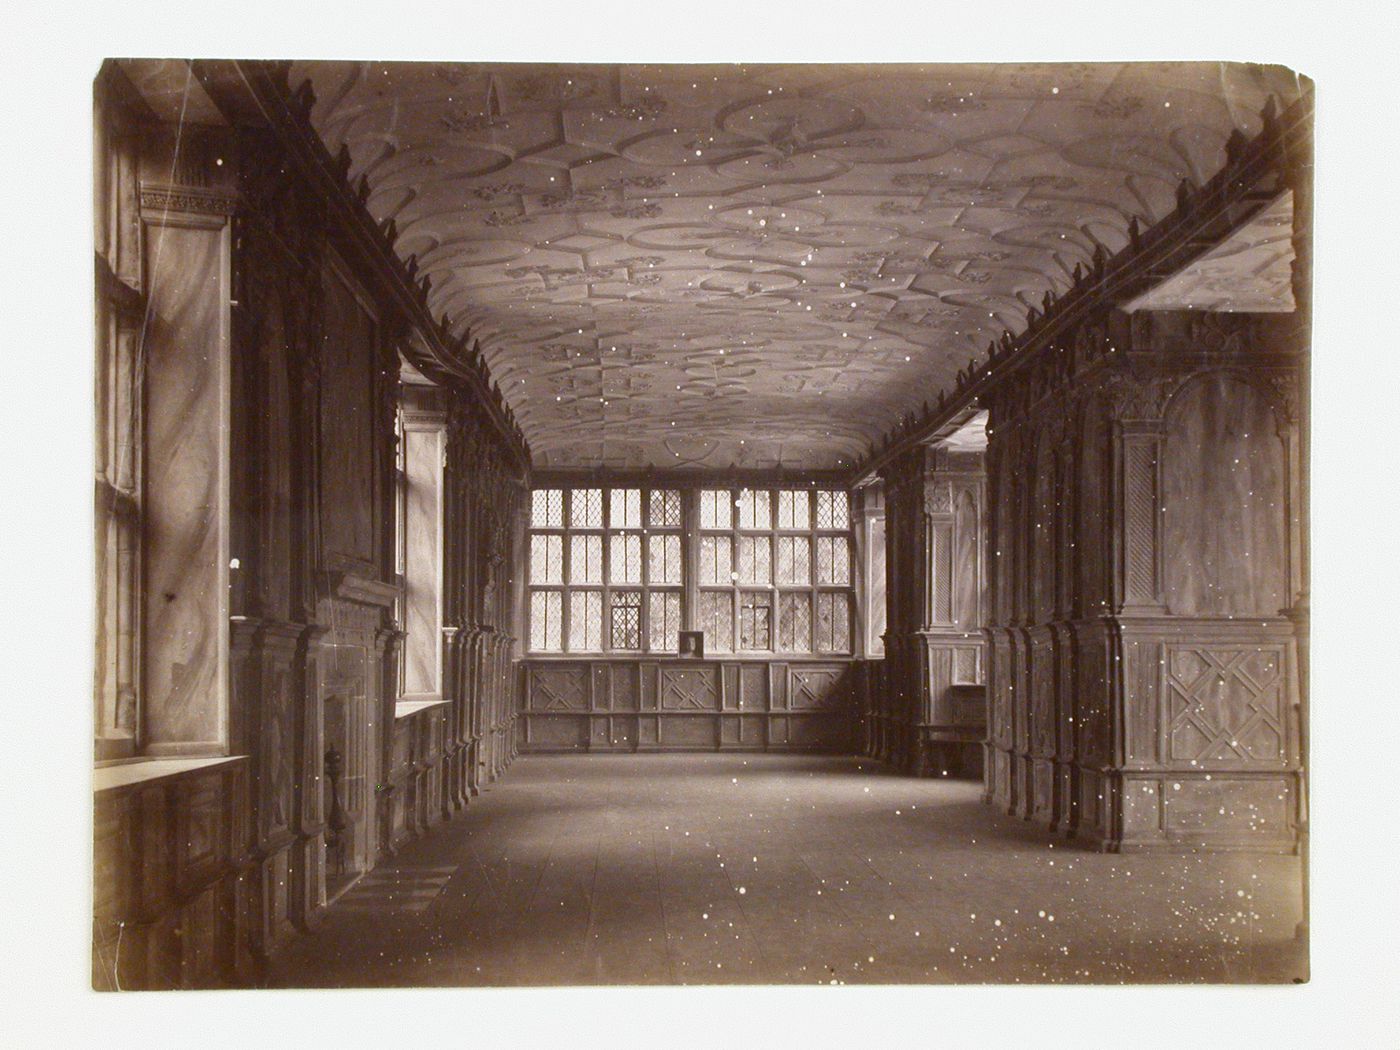 Interior view of the Long Gallery showing the death mask of Lady Grace Manners on the window ledge in the distance, Haddon Hall, Derbyshire, England